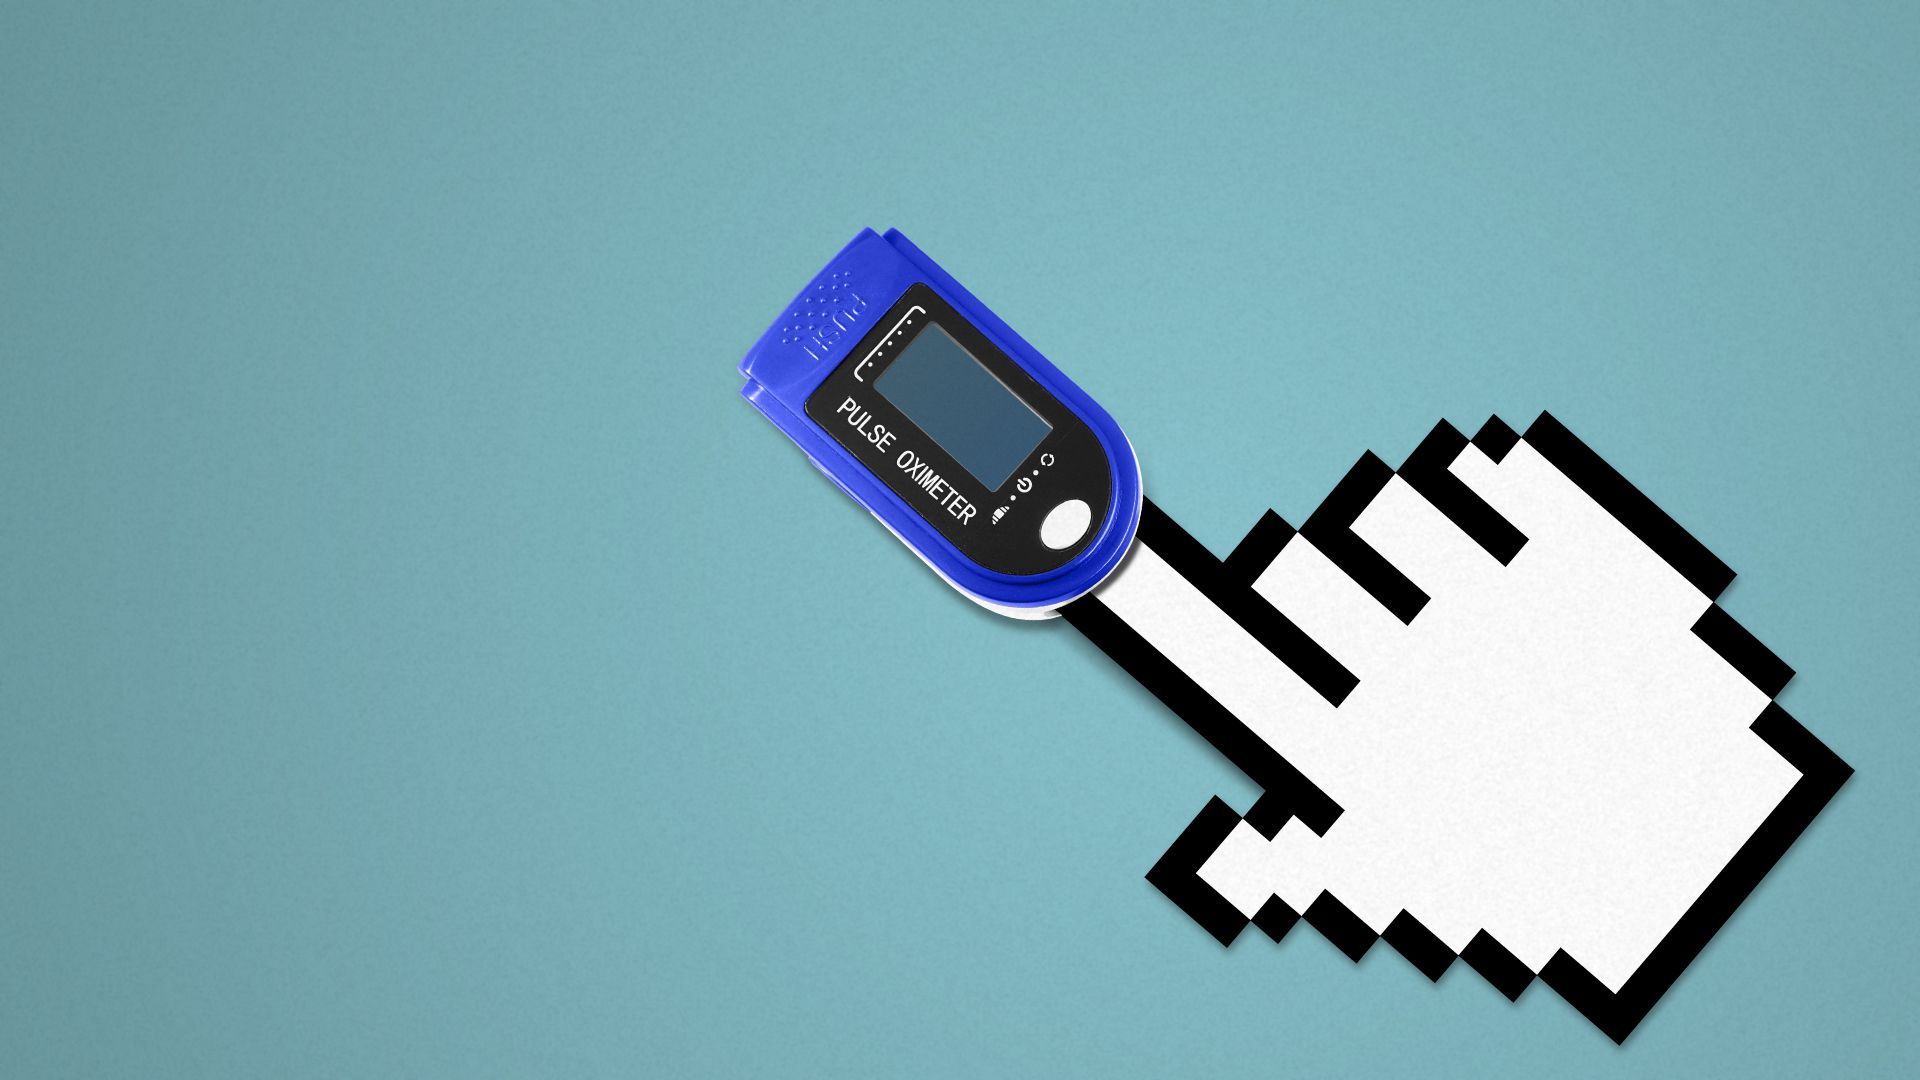 Illustration of a pulse monitor on the finger of a computer hand cursor.